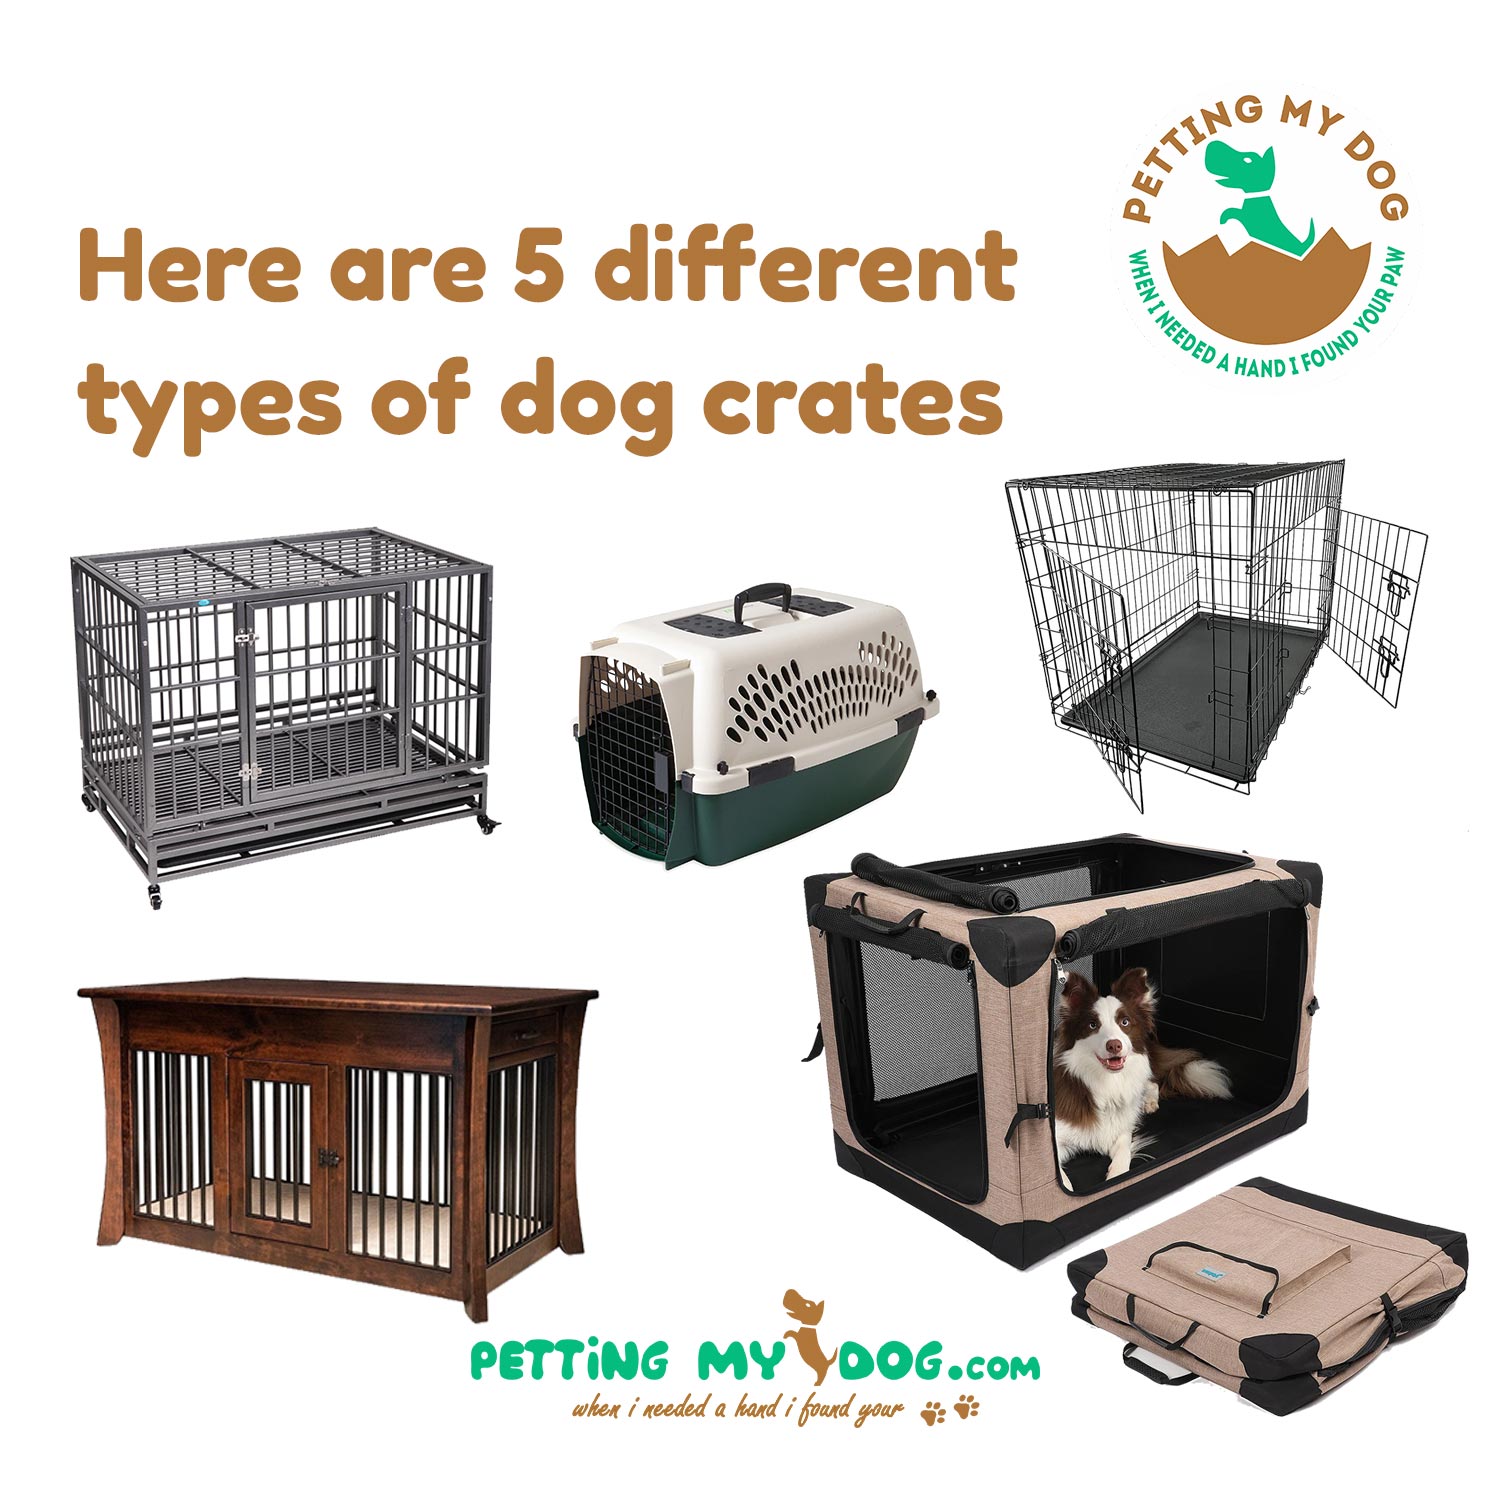 Here are 5 different types of dog crates available for your dog